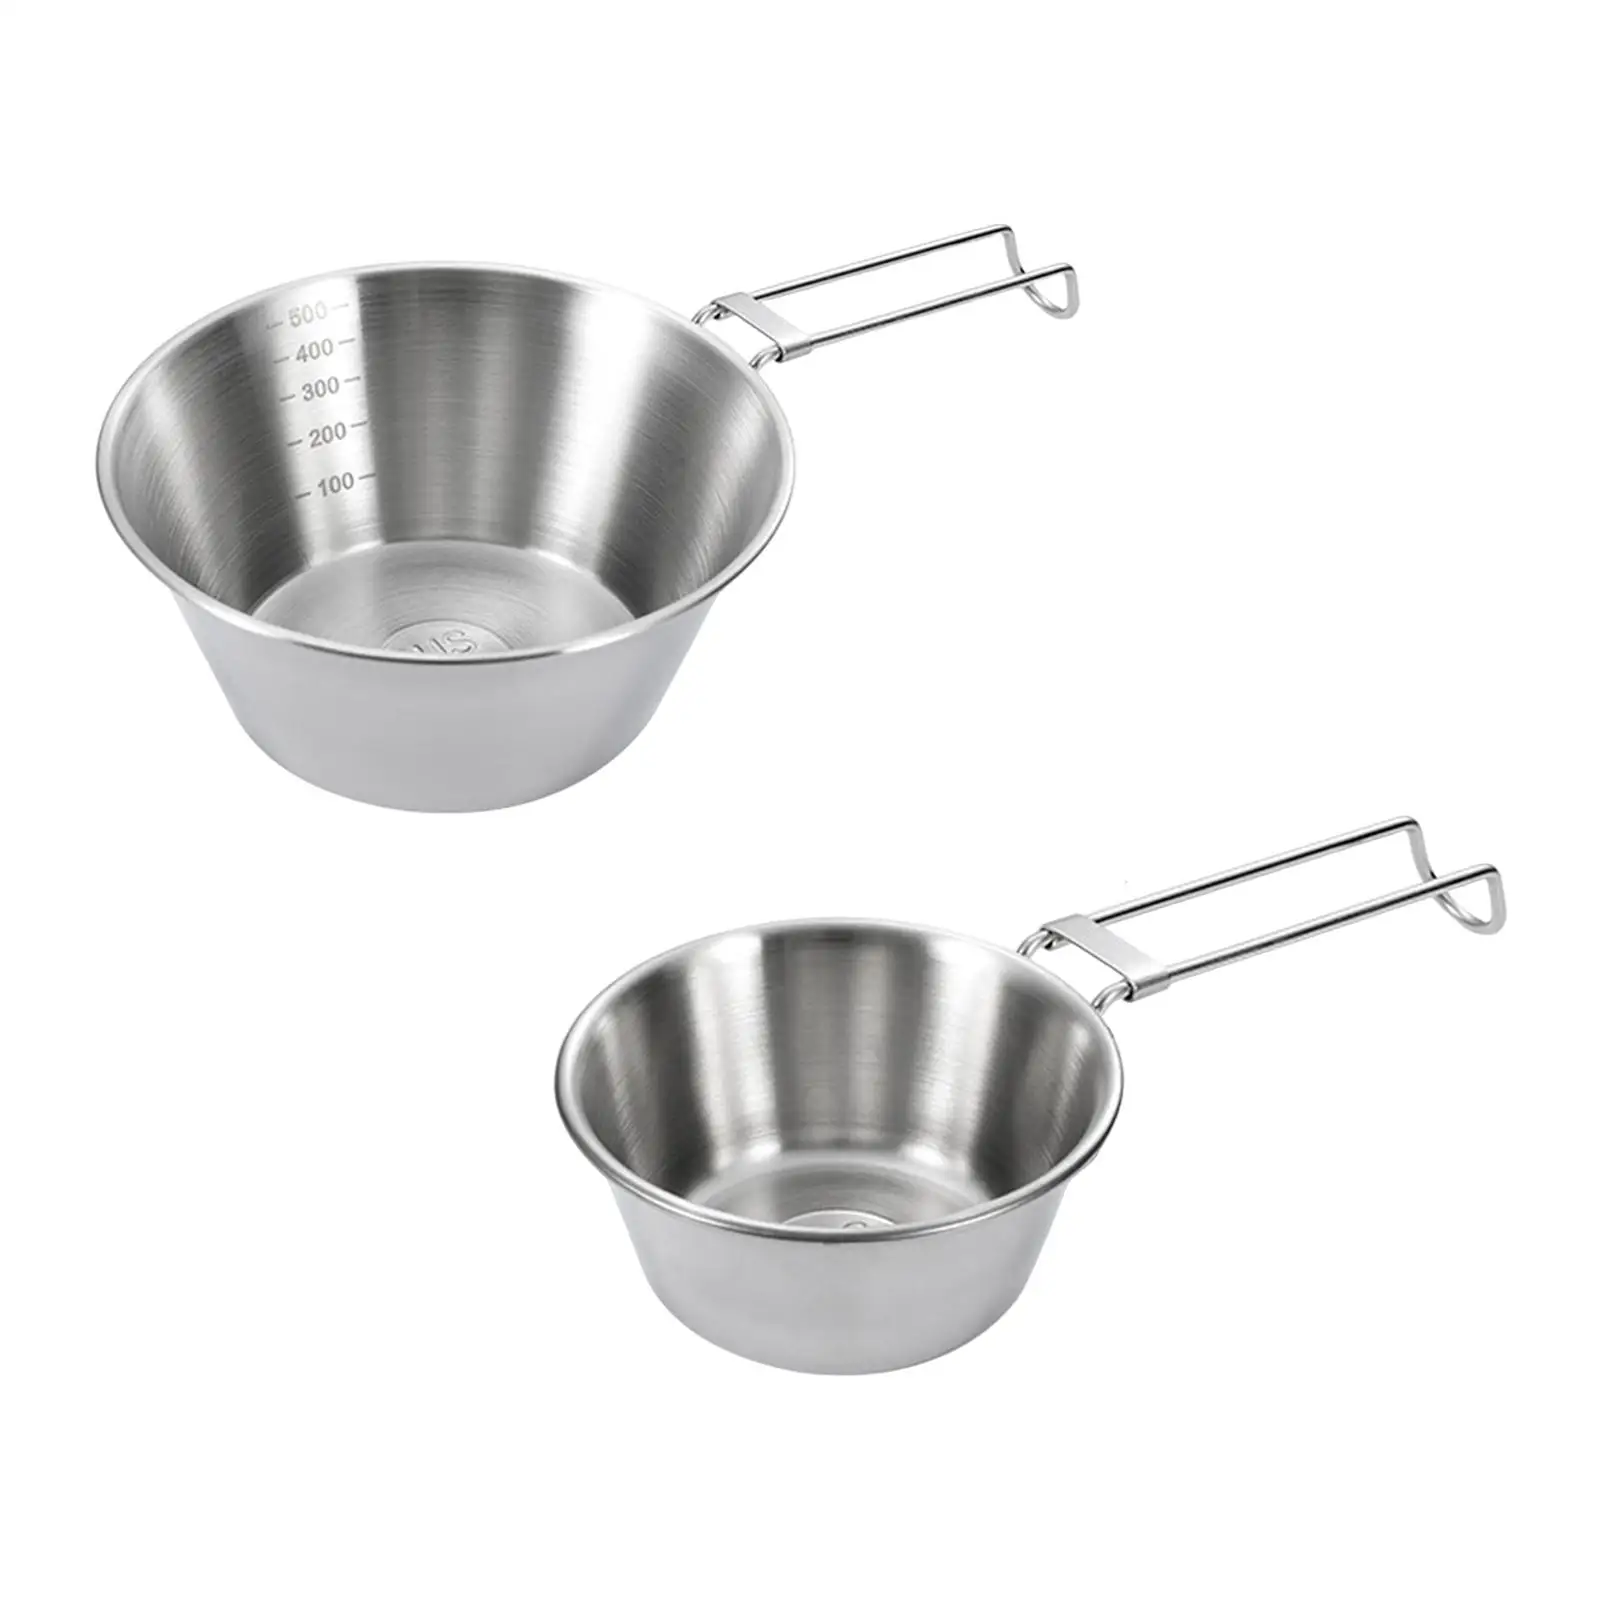 Camping Bowl Cooking Utensils with Folding Handle Tableware Stainless Steel